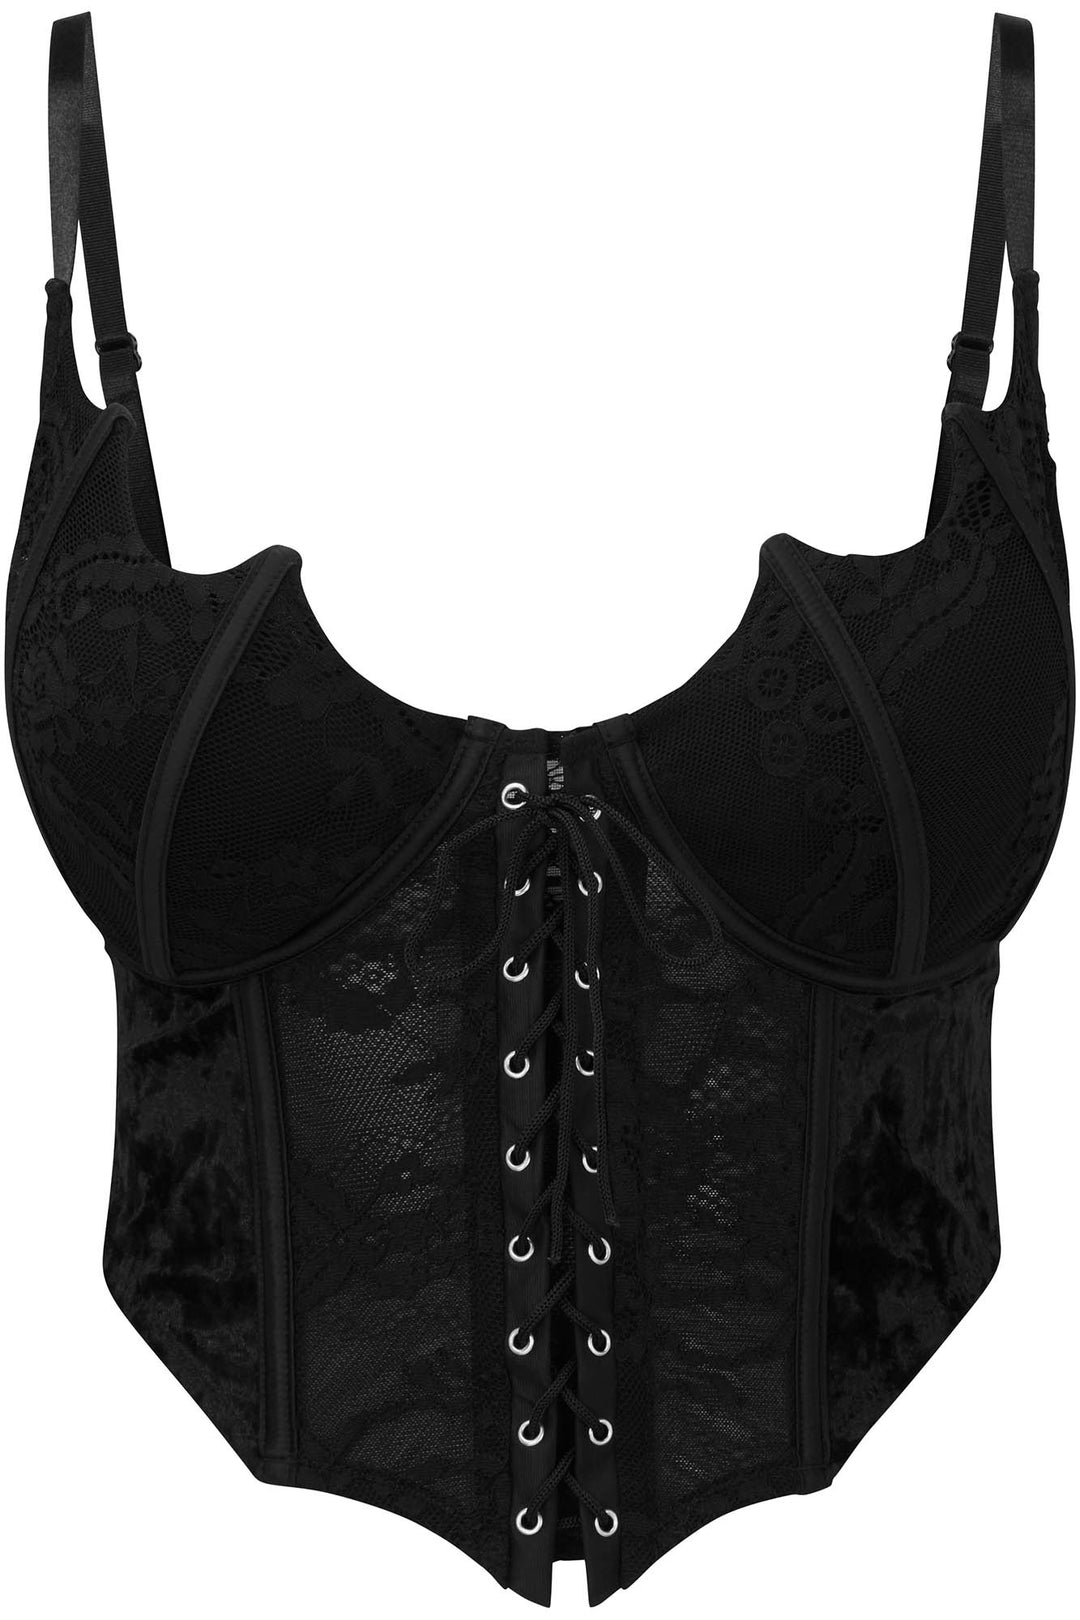 Fang Lace Bustier